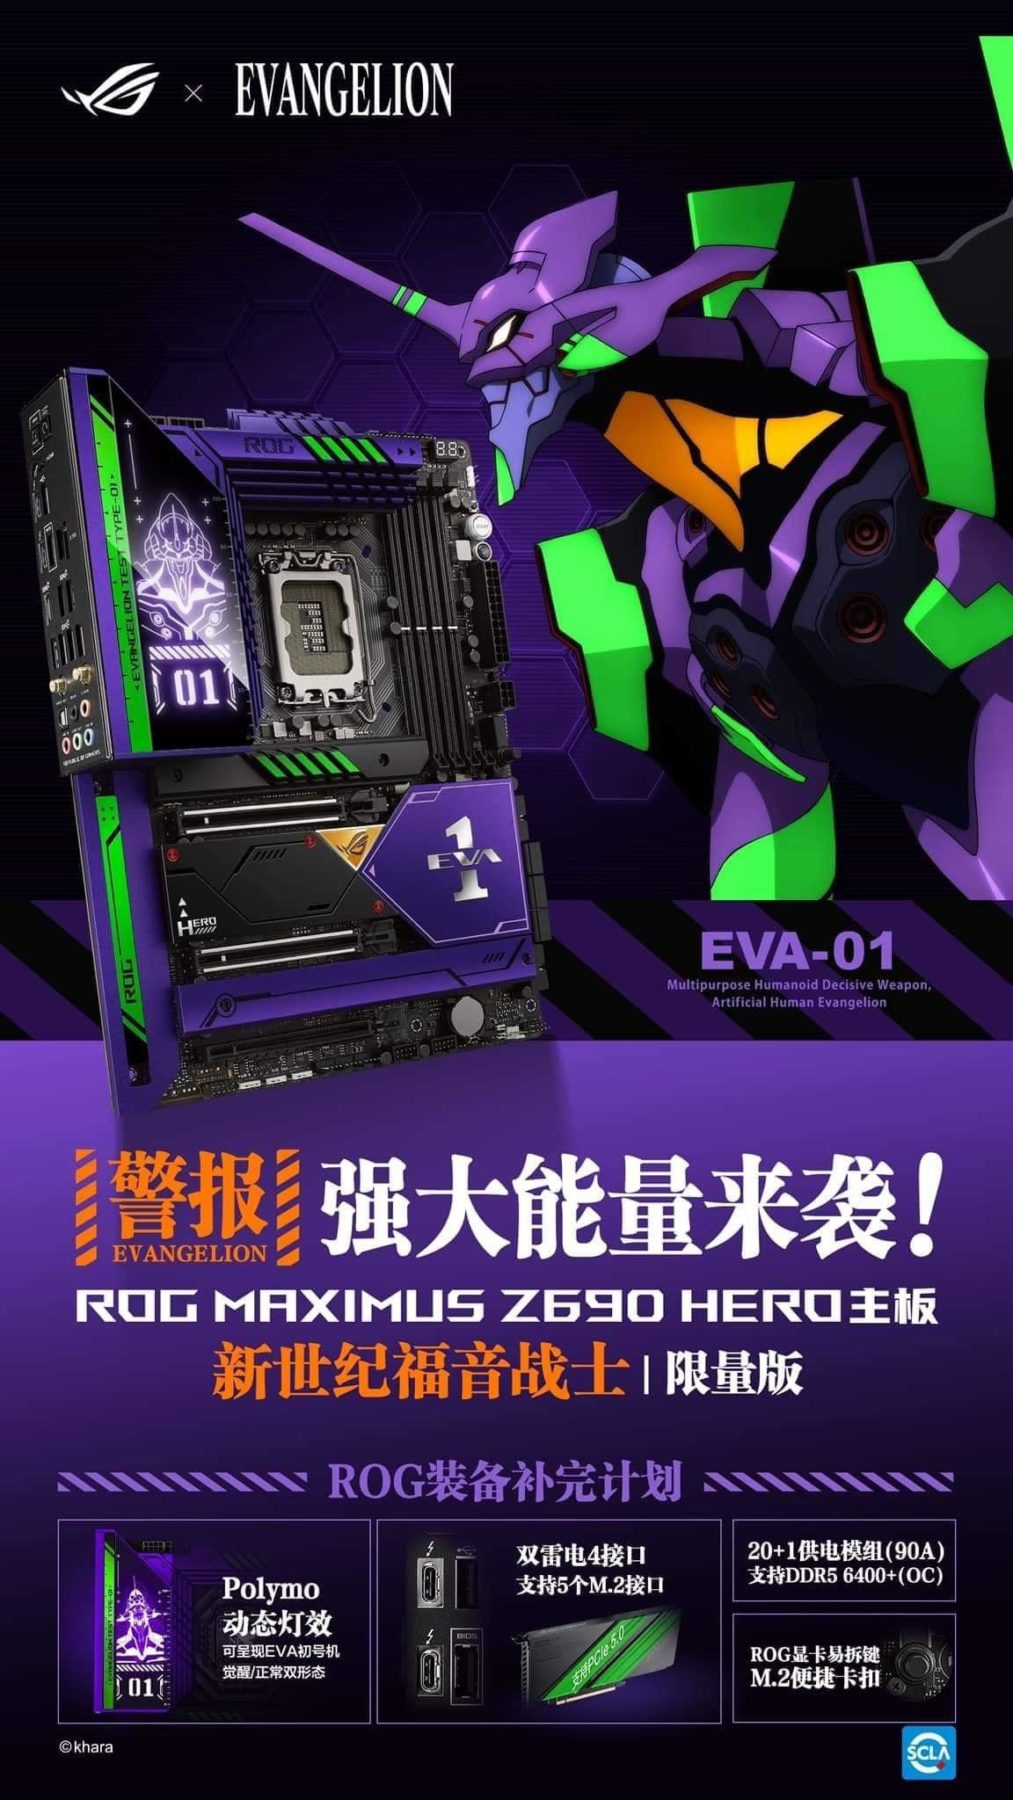 First Look at the ROG x Evangelion MAXIMUS Z690 HERO EVA Edition Motherboard - returnal